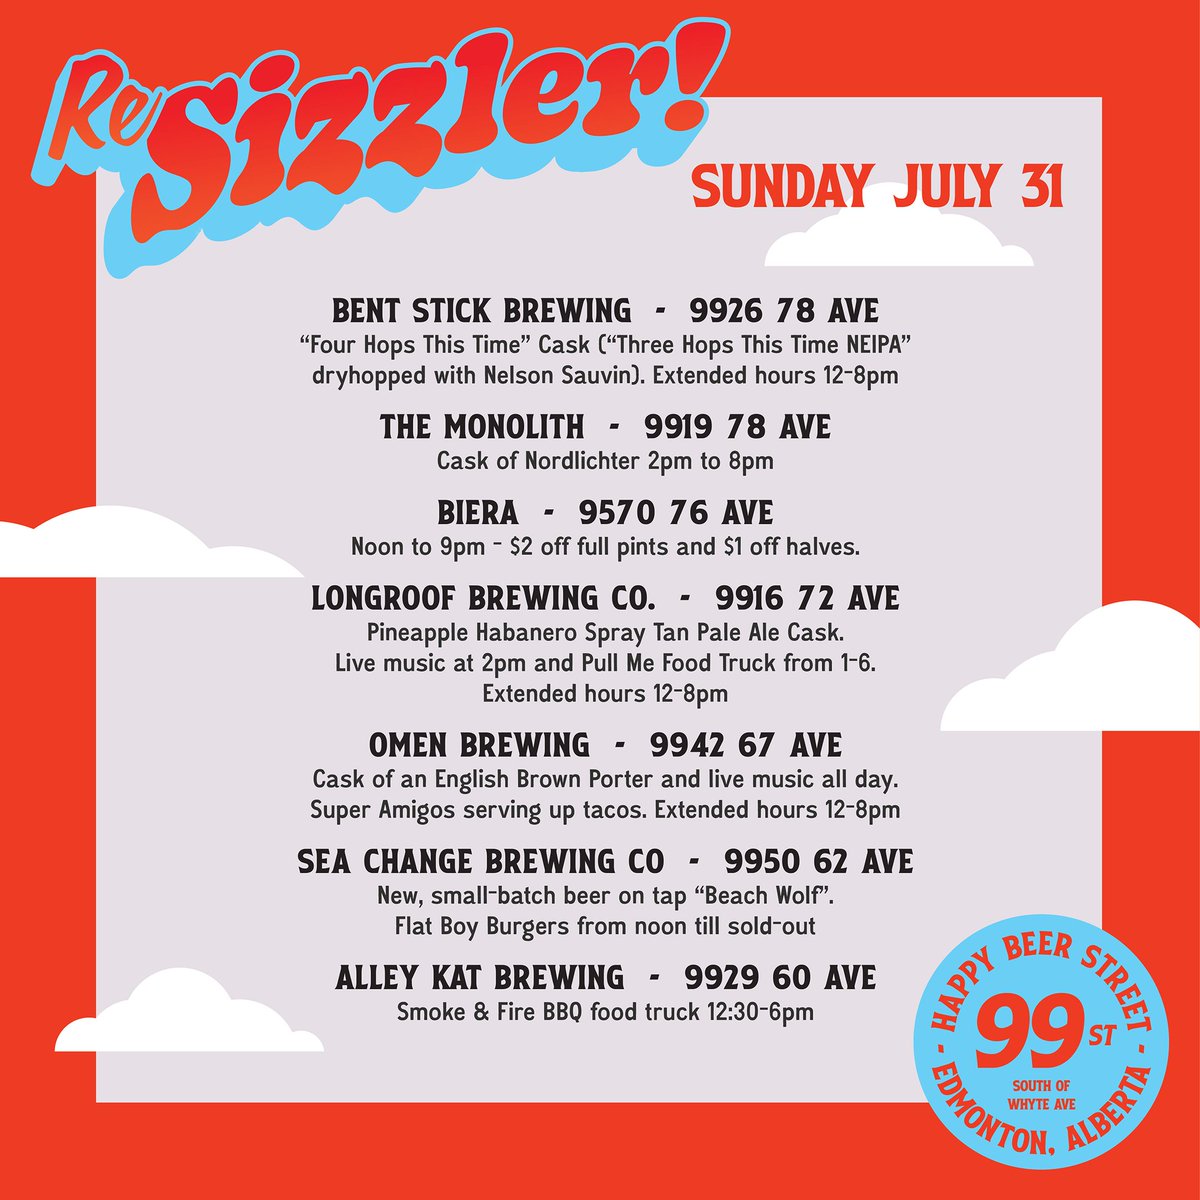 We are beyond stoked to celebrate another day of strolling the Happy Beer Street district this coming Sunday 🏖️🐺 #HappyBeerStreet